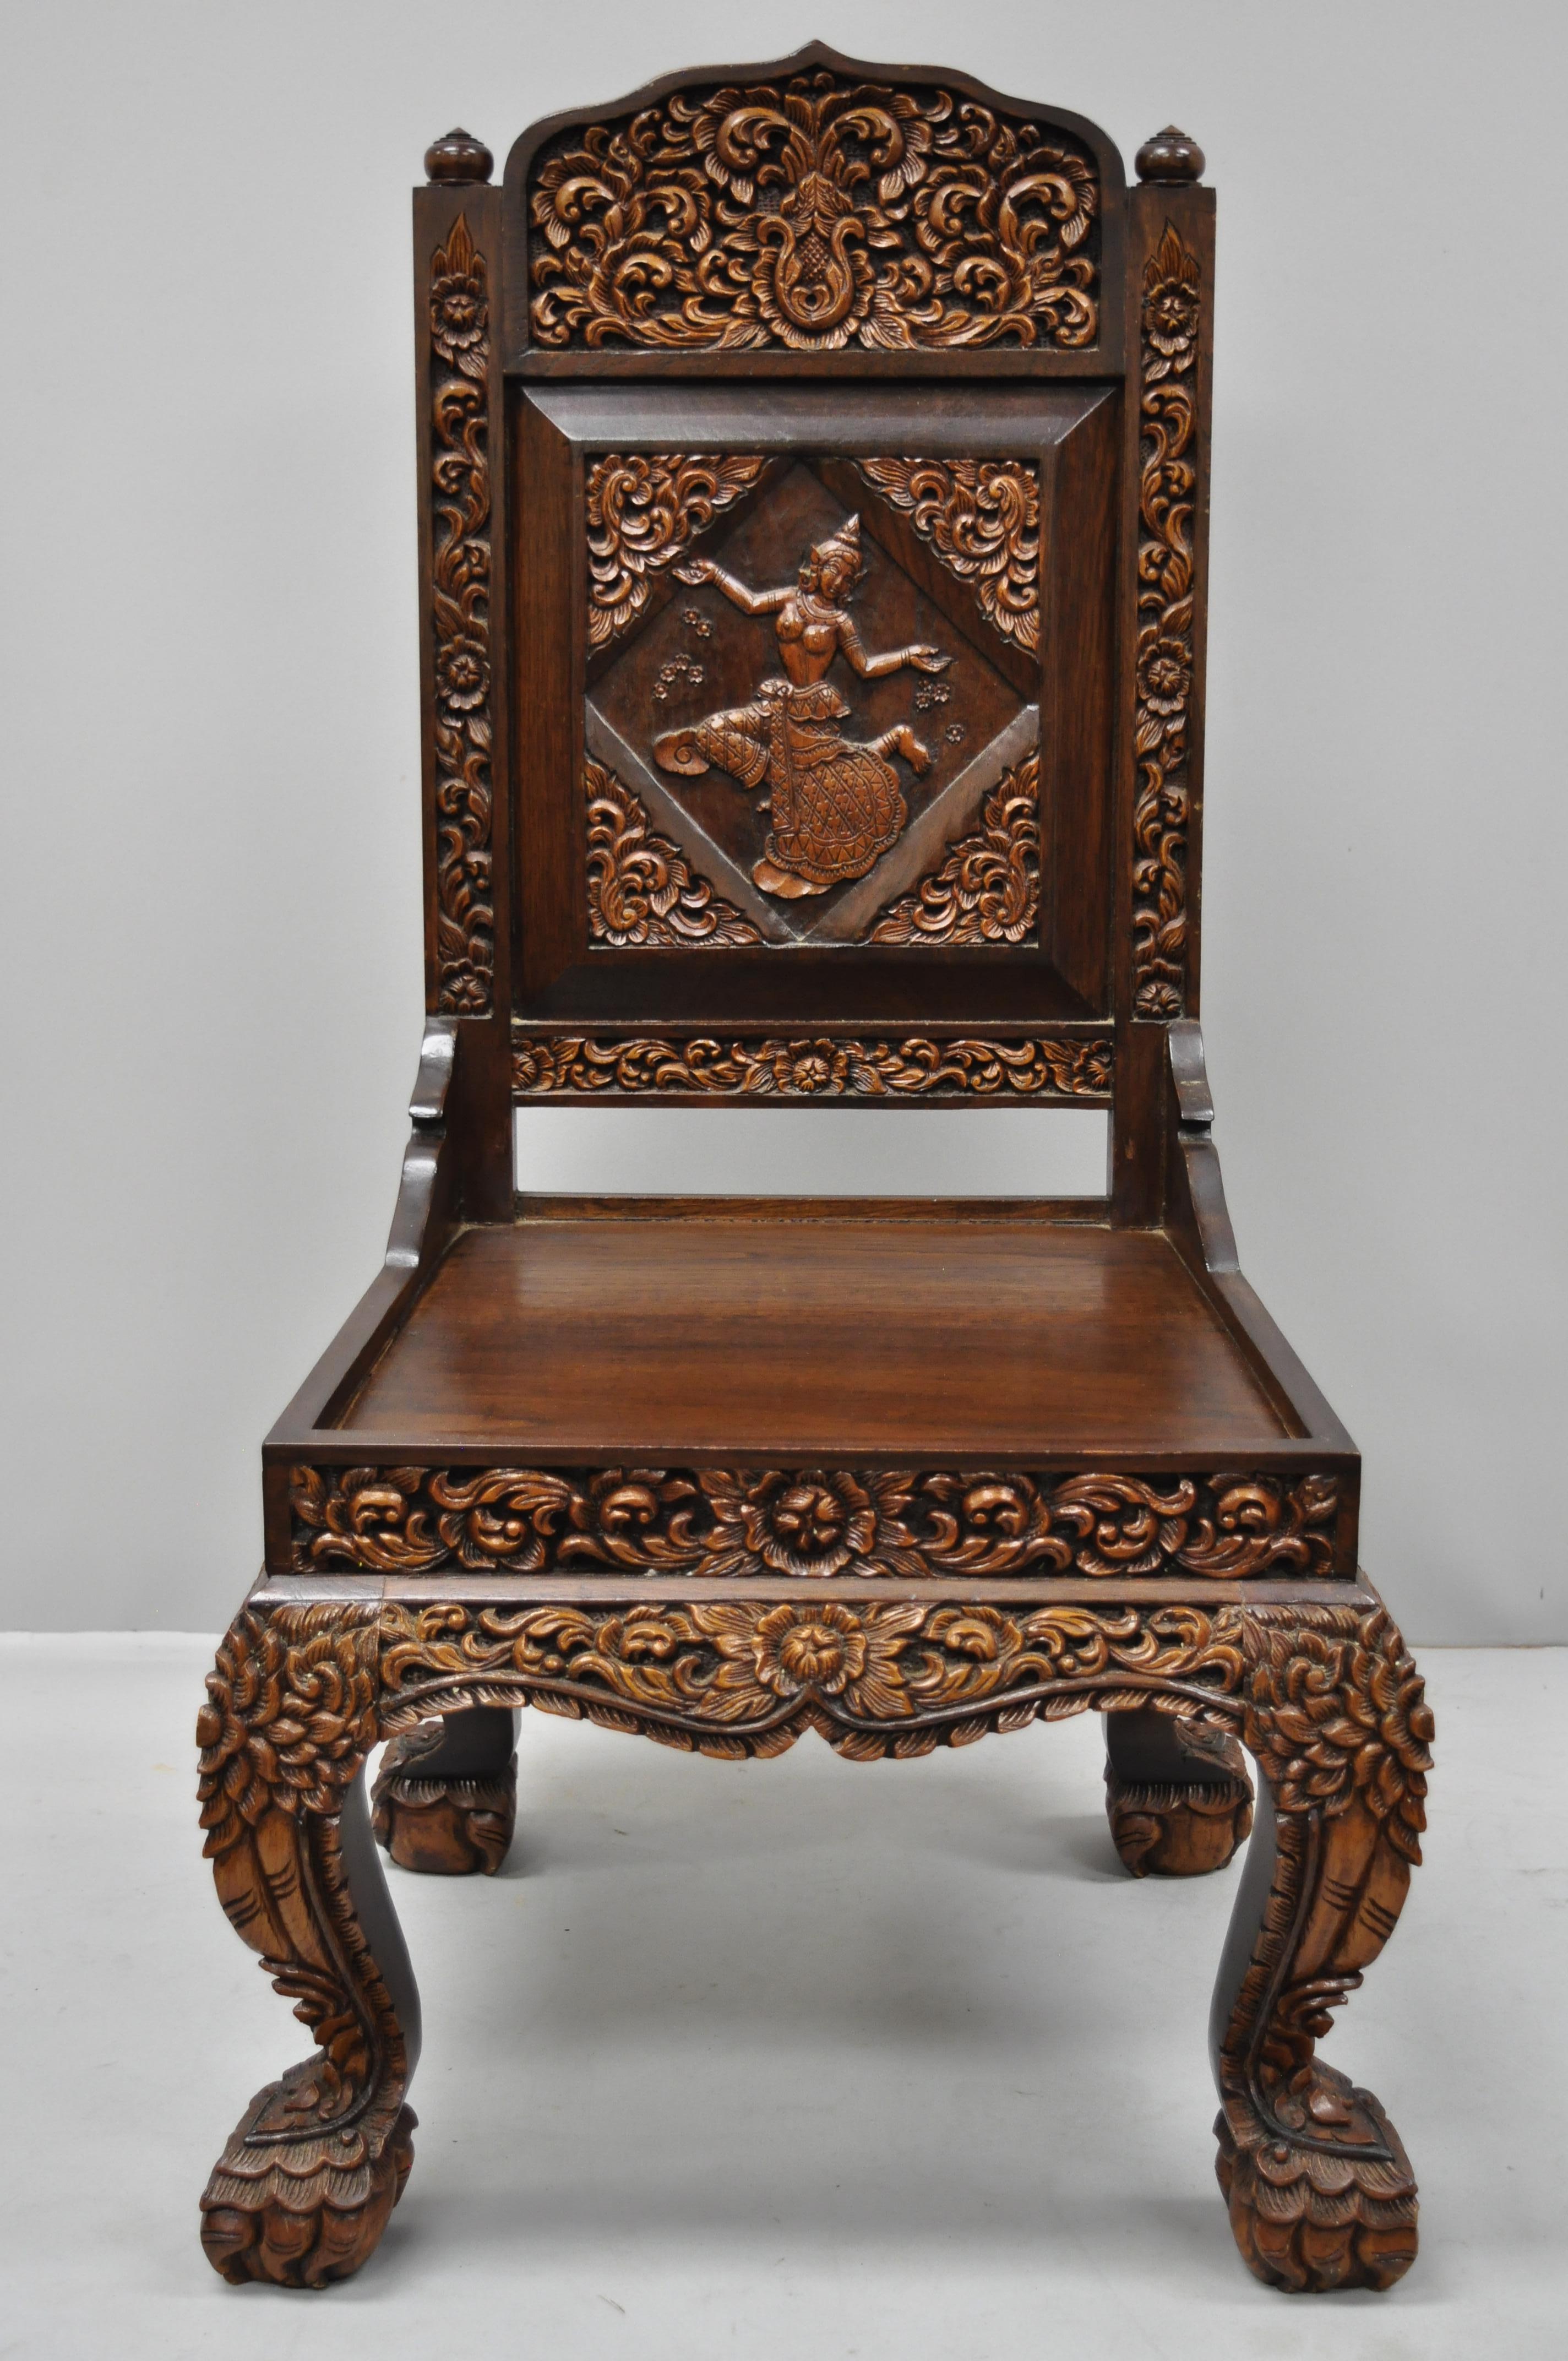 Chinese Chippendale 6 Hand-Carved Thai Oriental Teak Wood Dining Chairs with Dancing Female